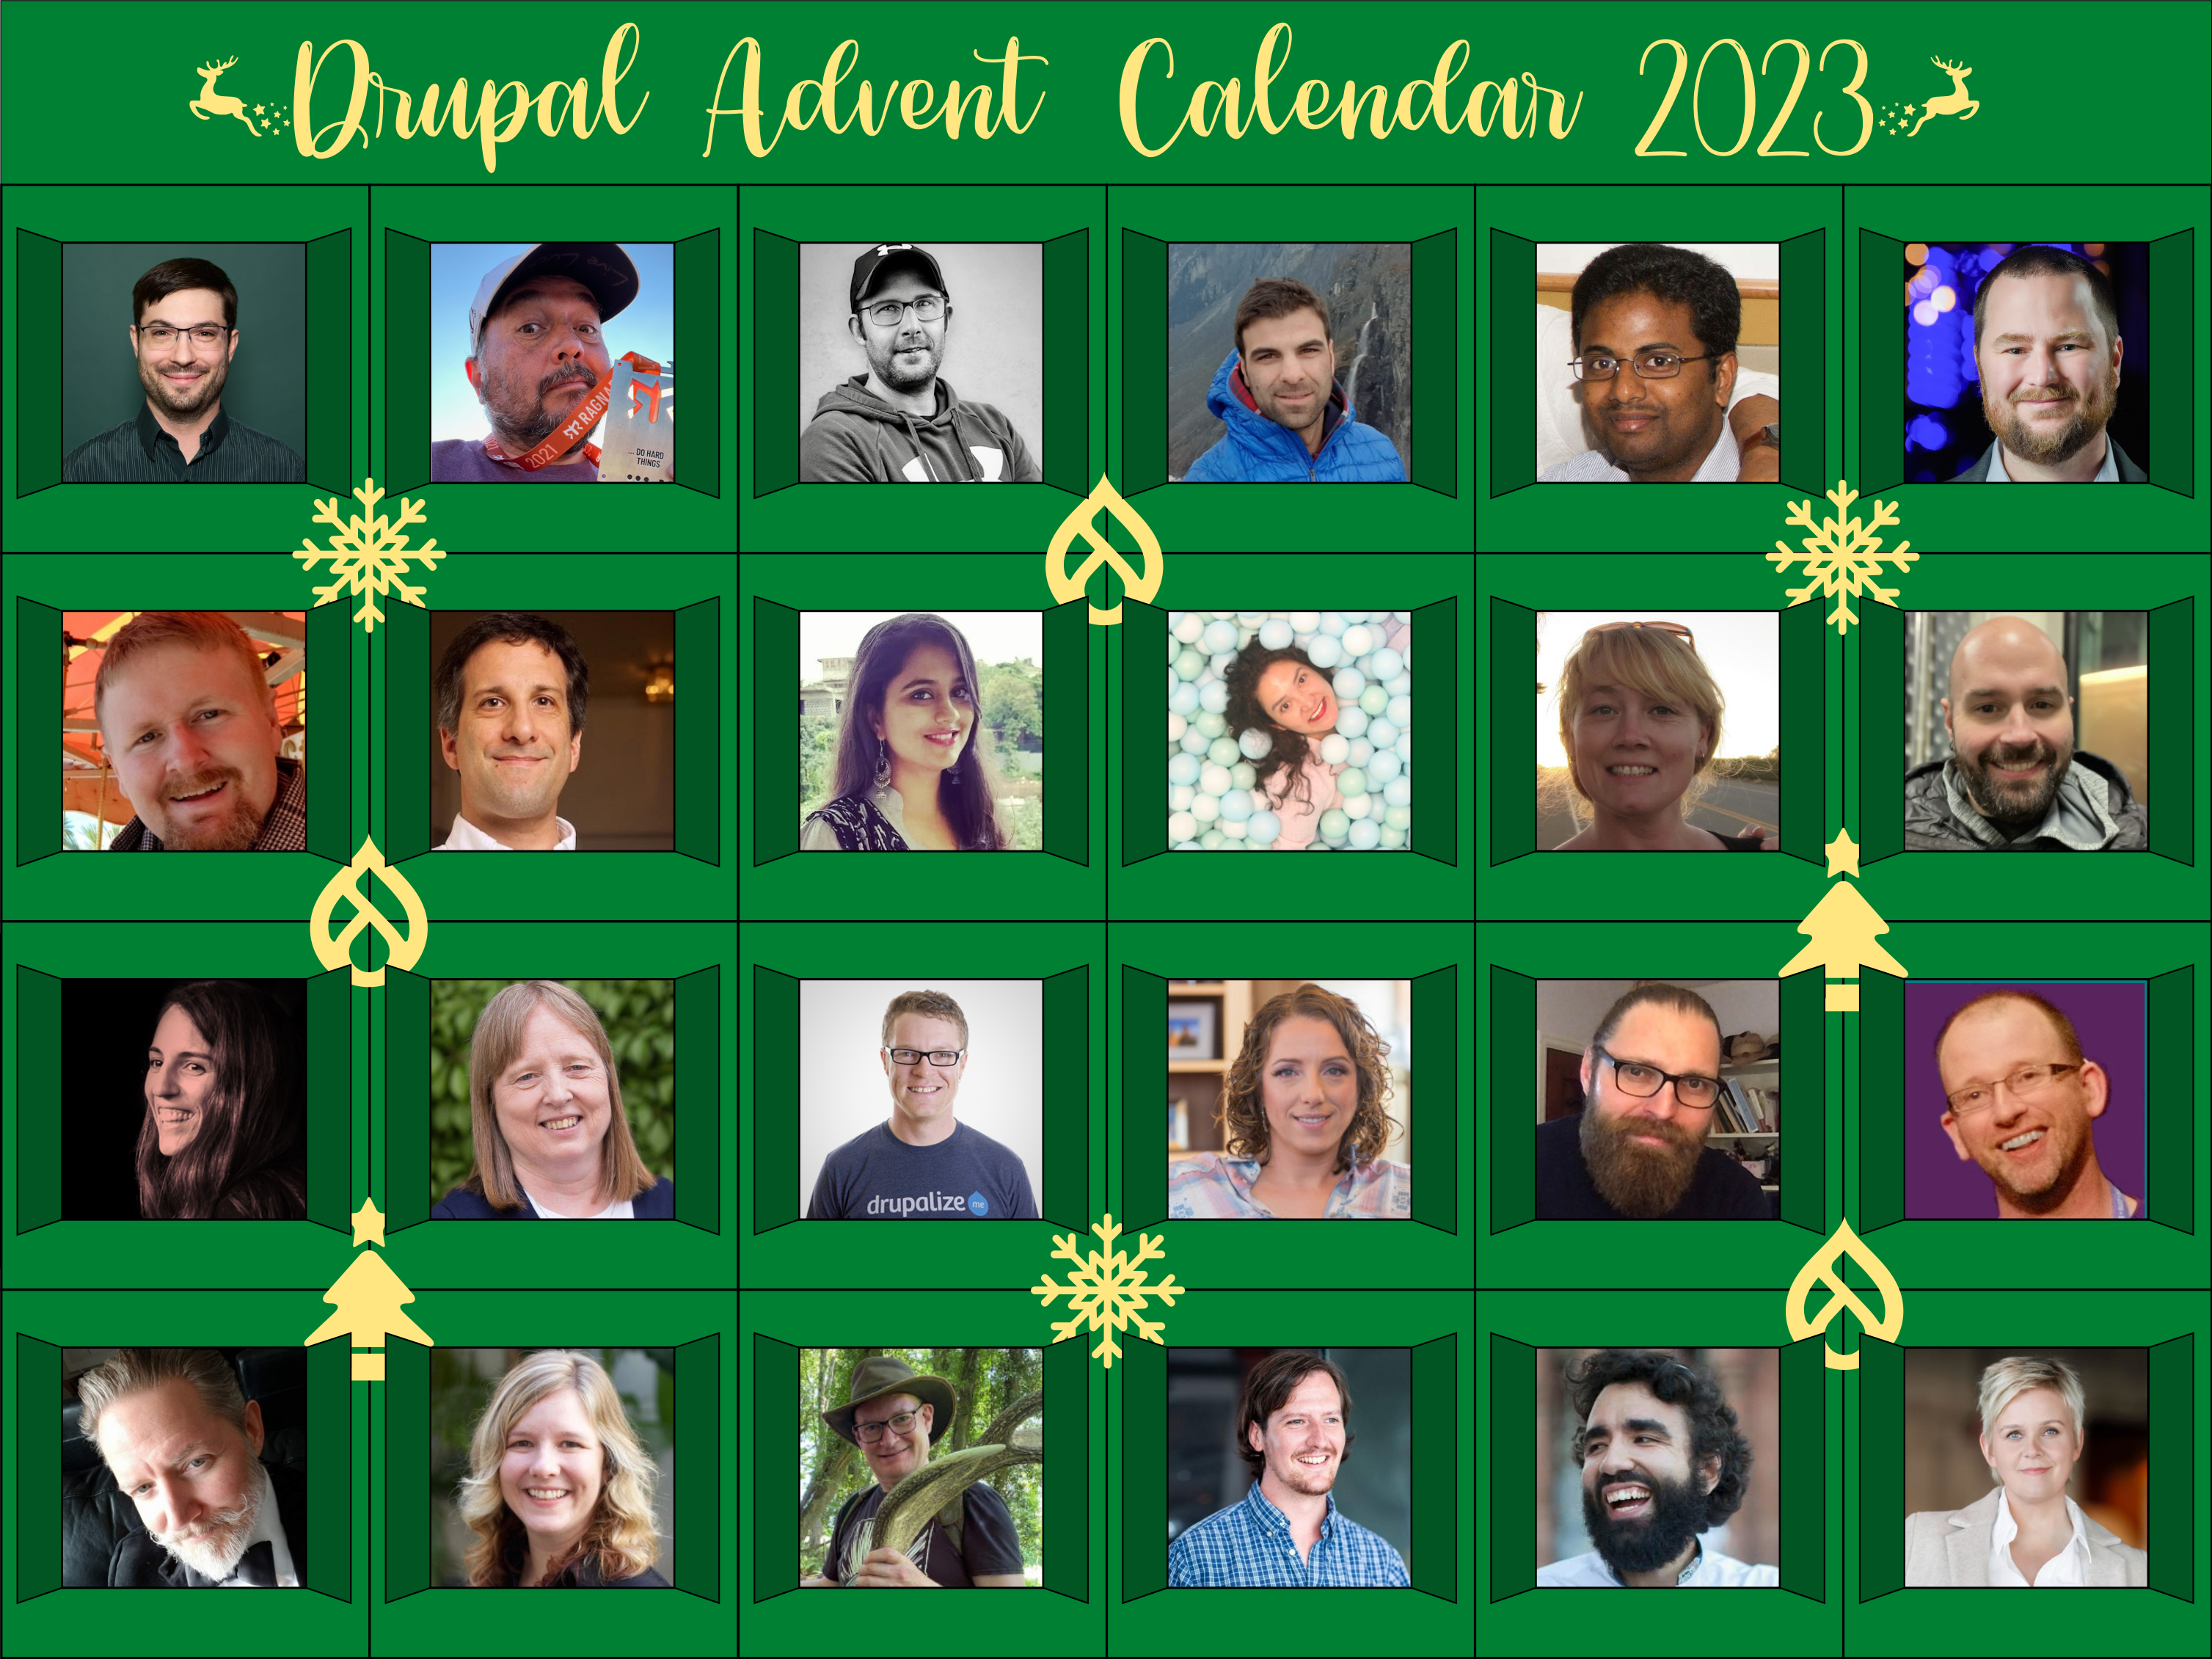 The calendar with the people behind the doors